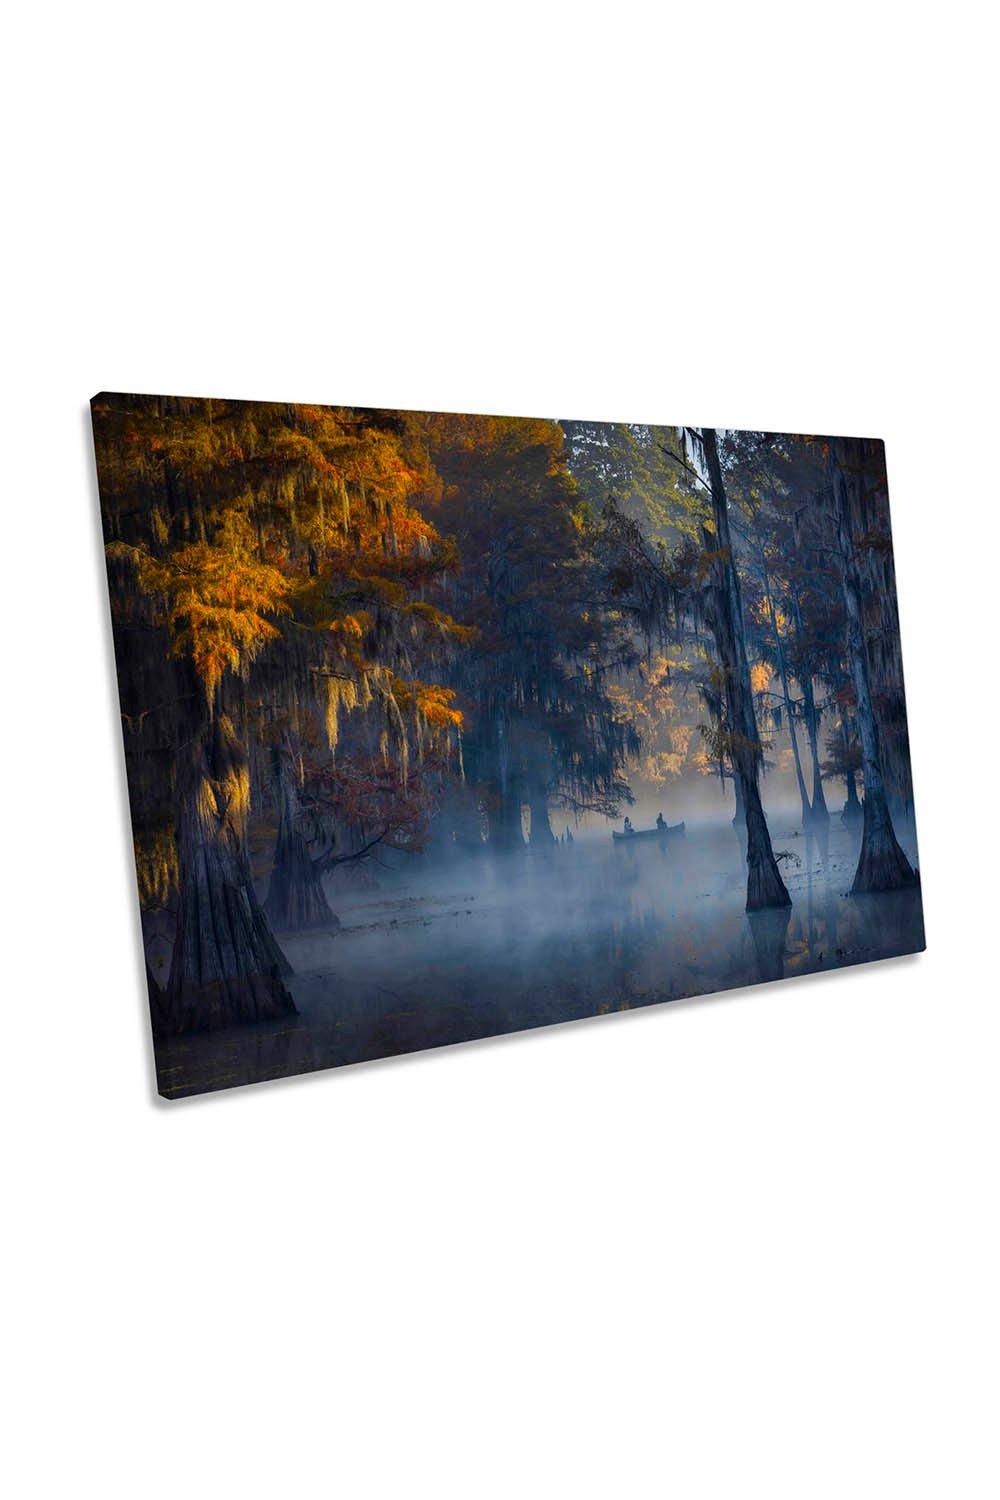 Mystical Exploration Adventure Lake Trees Canvas Wall Art Picture Print